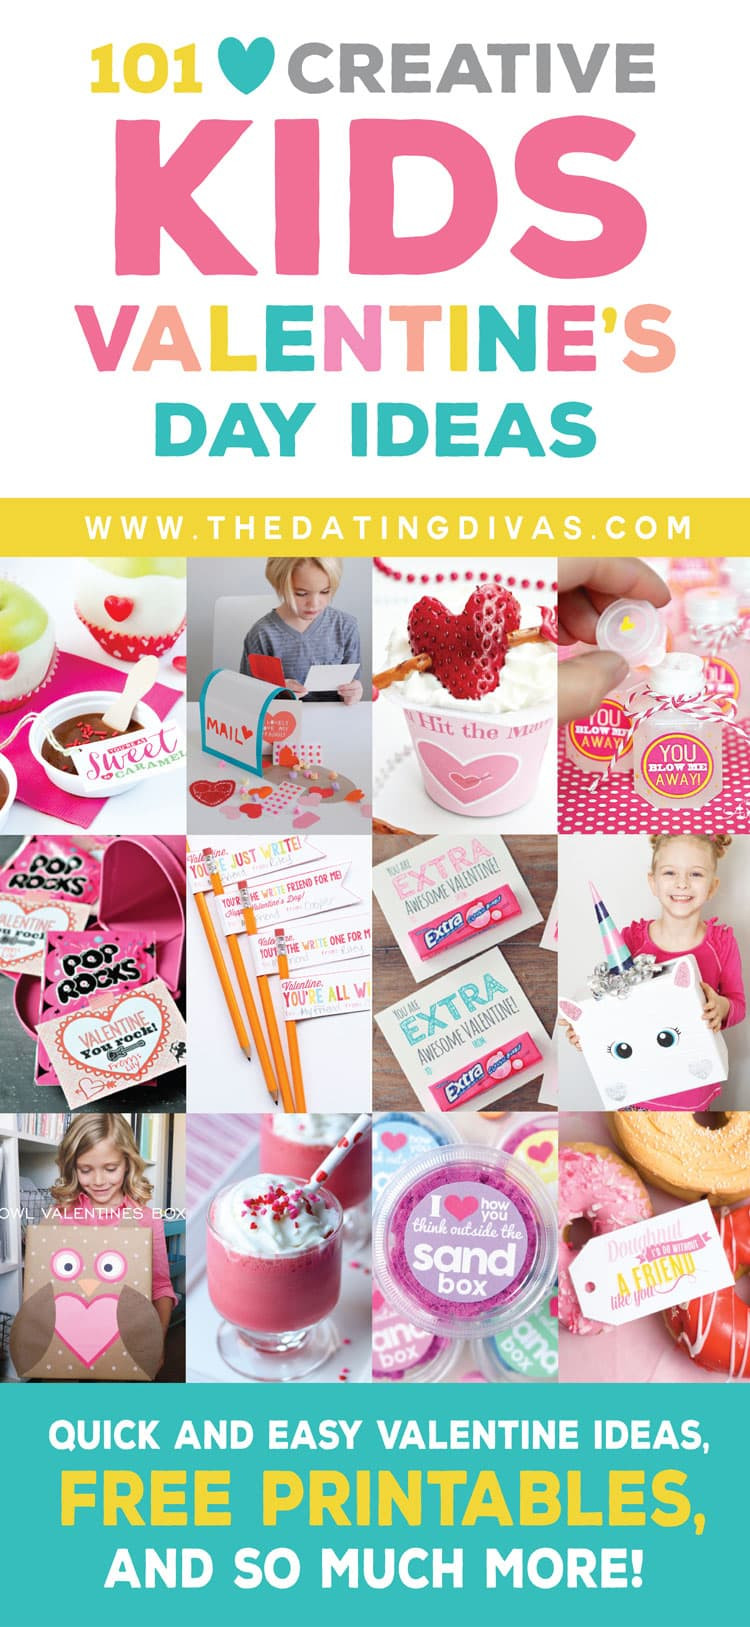 Creative Gifts For Children
 100 Kids Valentine s Day Ideas Treats Gifts & More